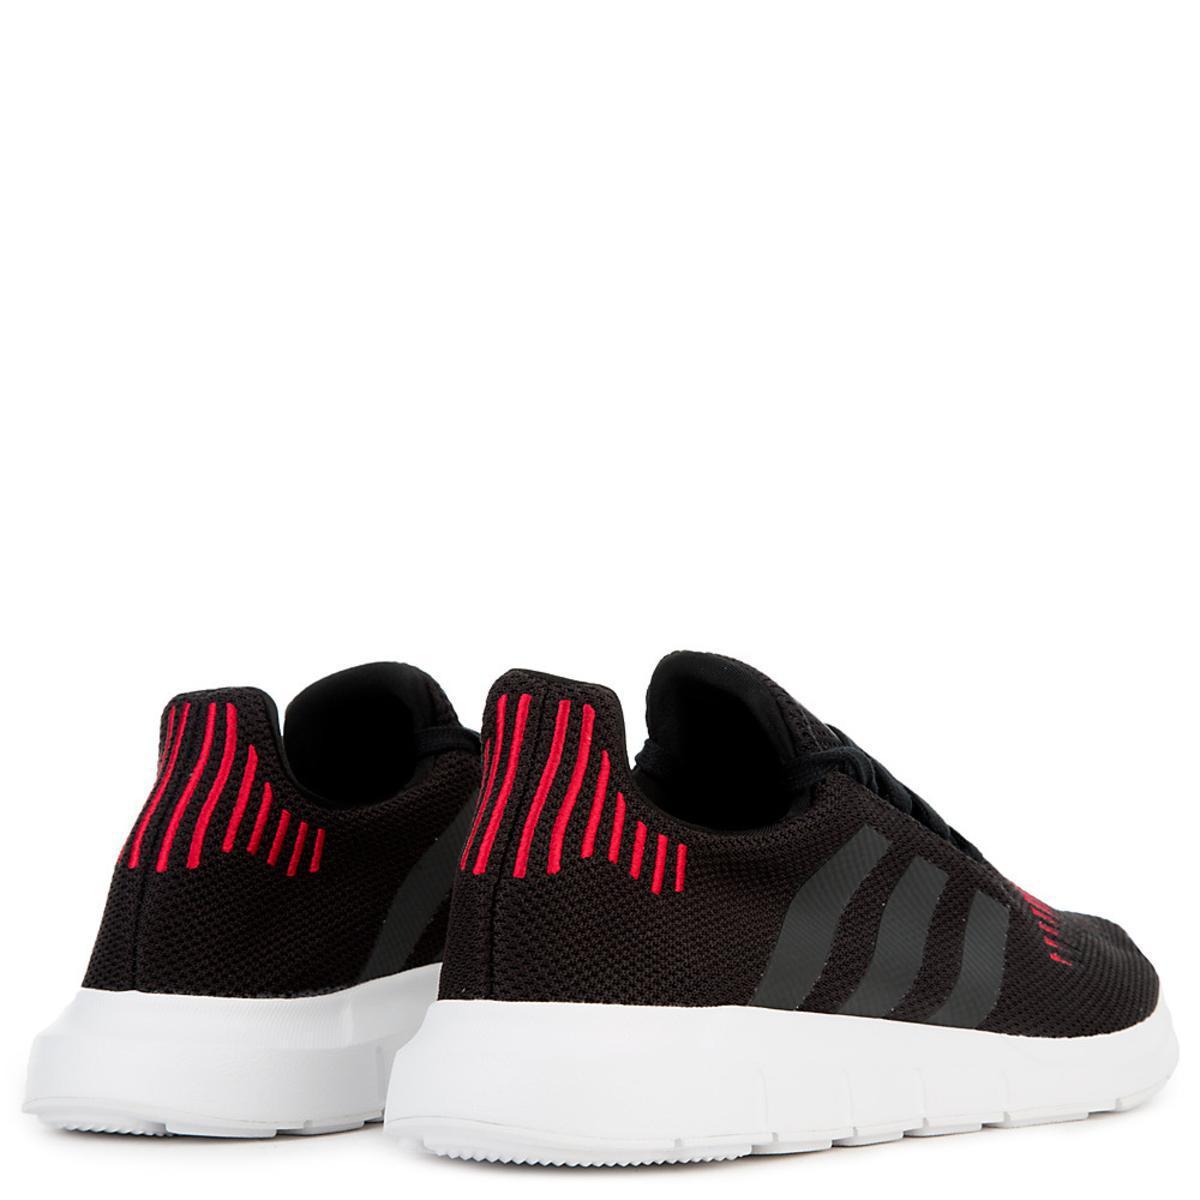 adidas swift run black and red online -